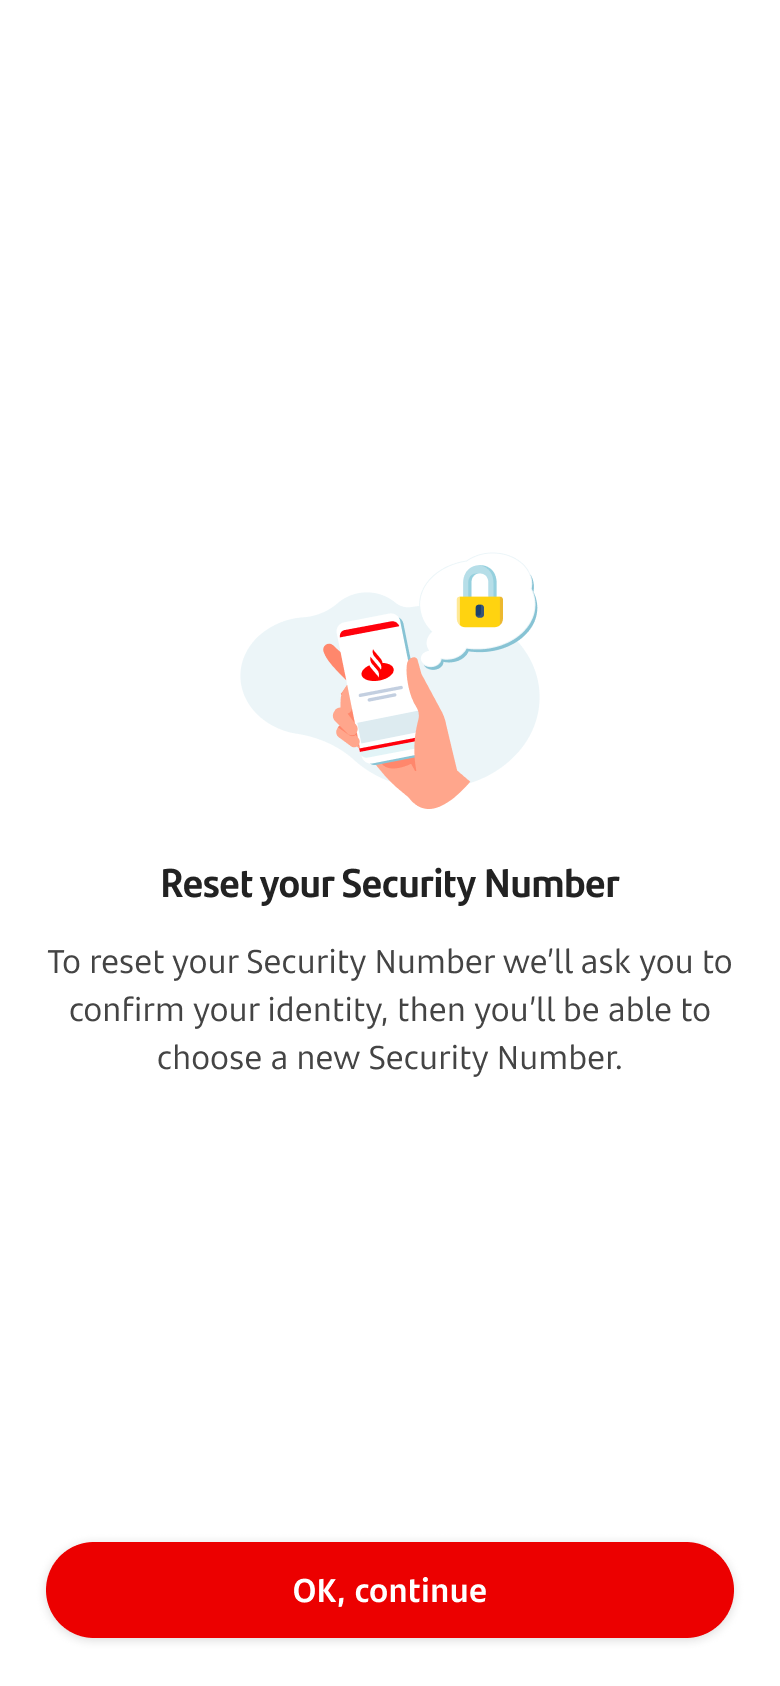 Reset your Security Number screen